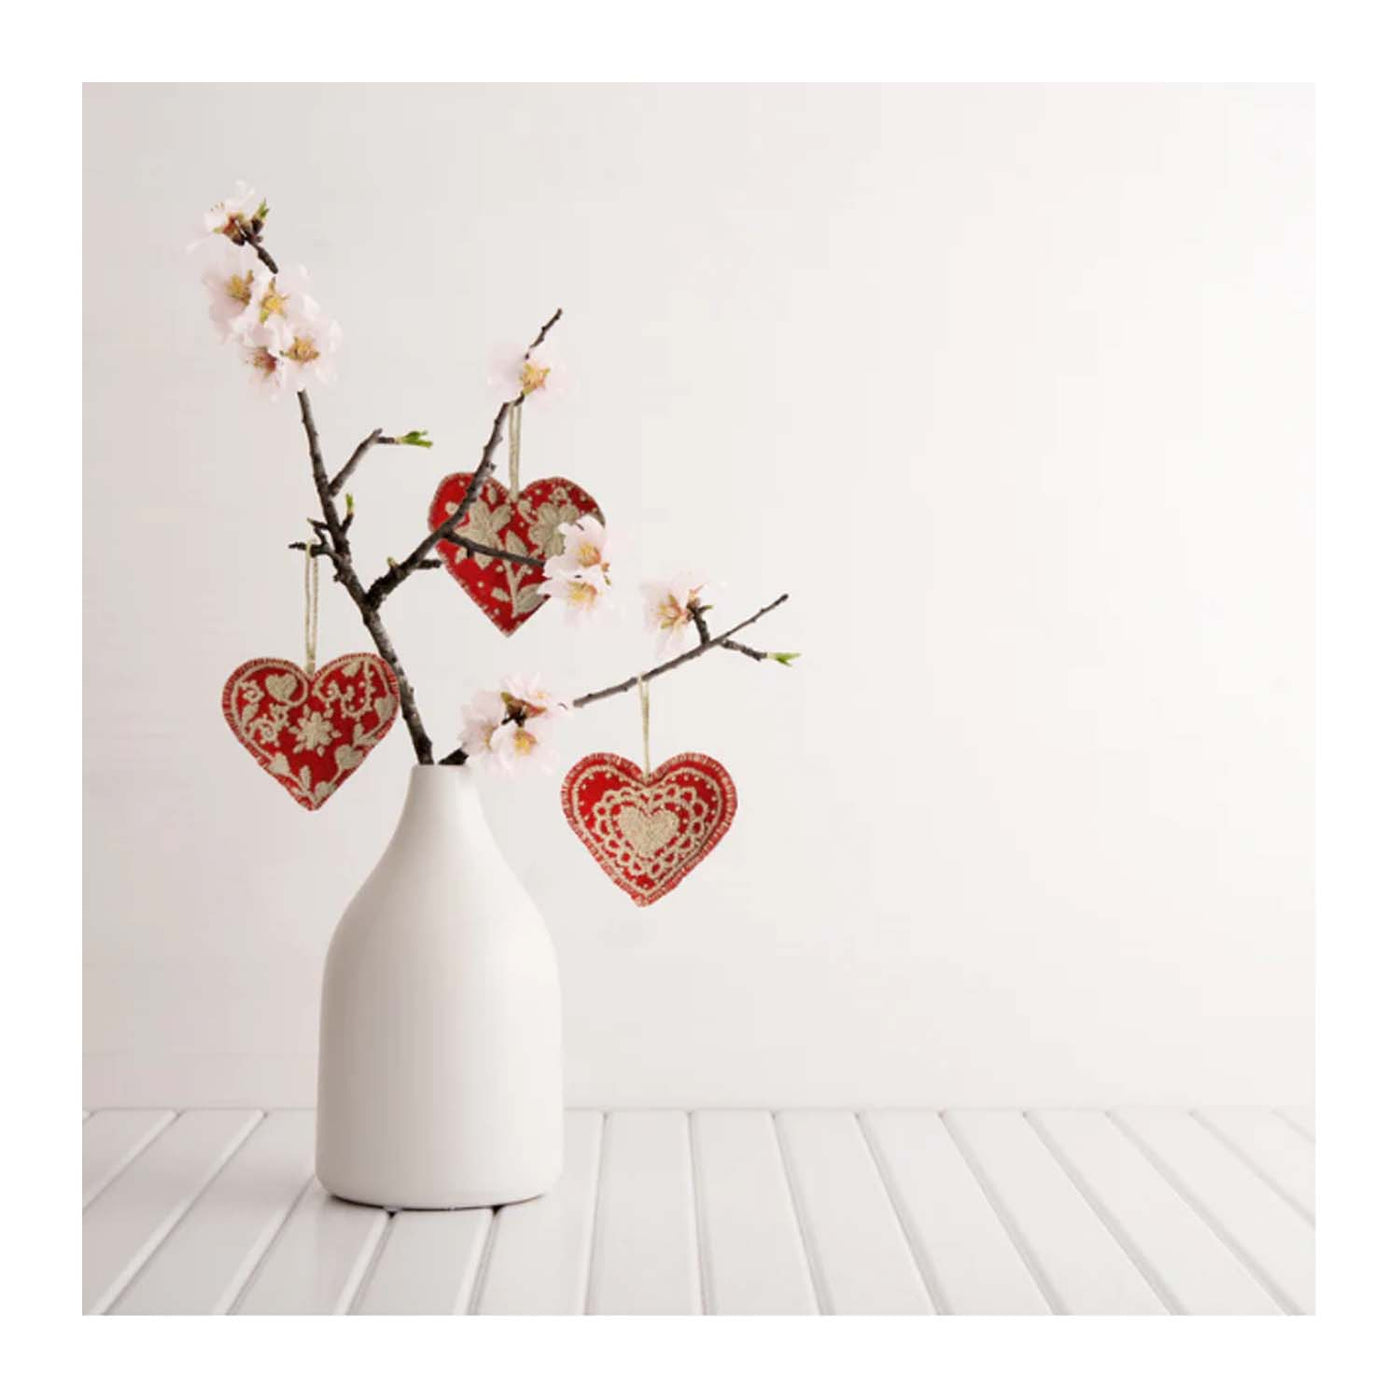 embroidered hearts hanging from branches in a vase